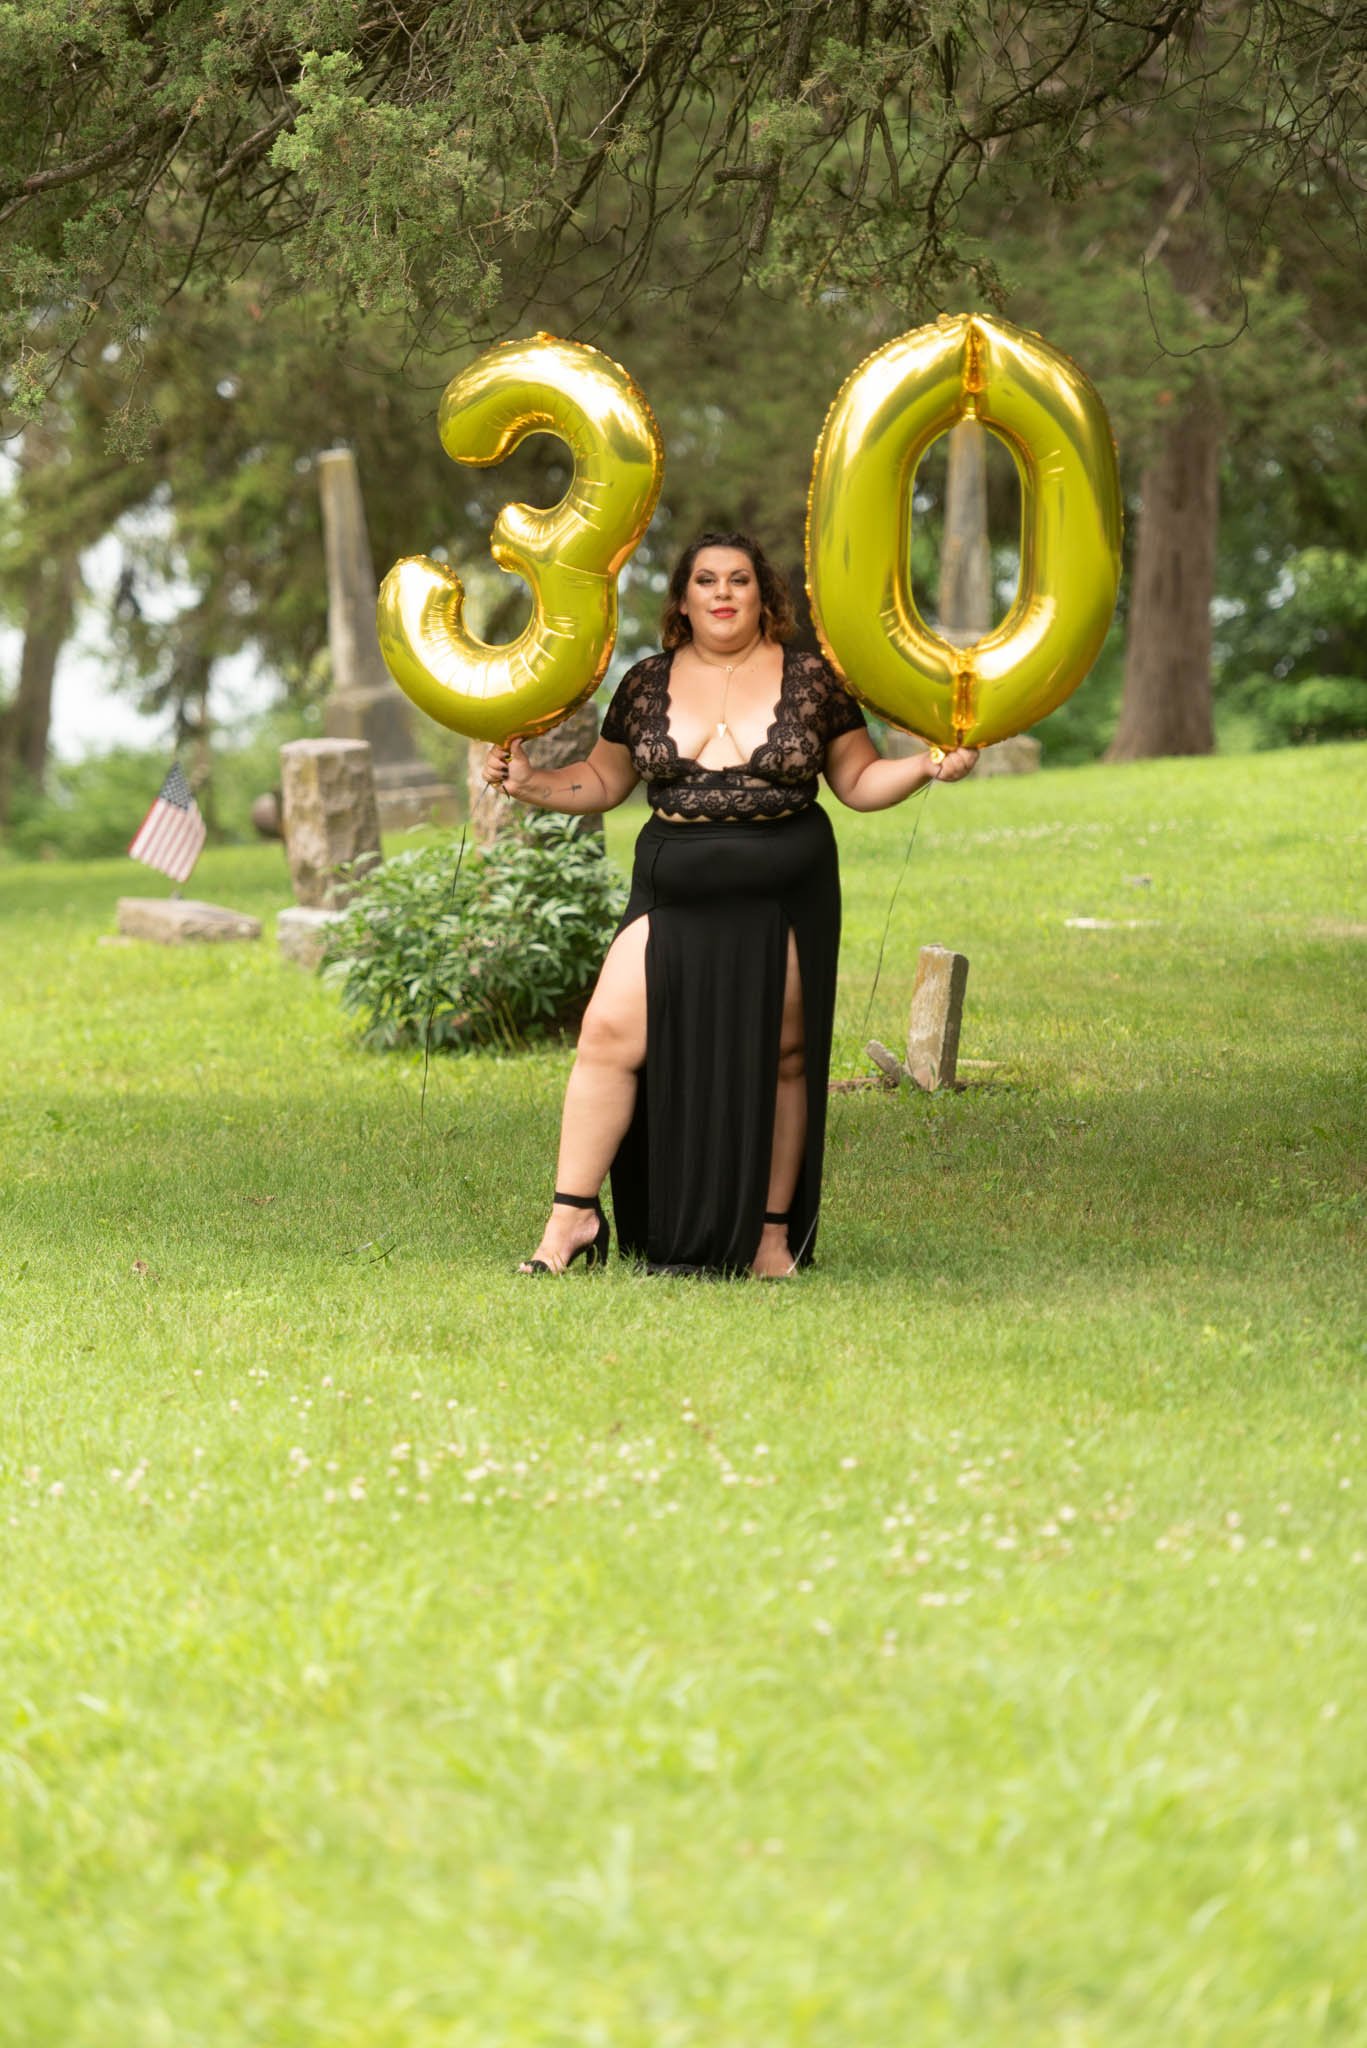  Samantha in black dress poses fiercely in cemetery holding gold foil balloons displaying the number 30. 